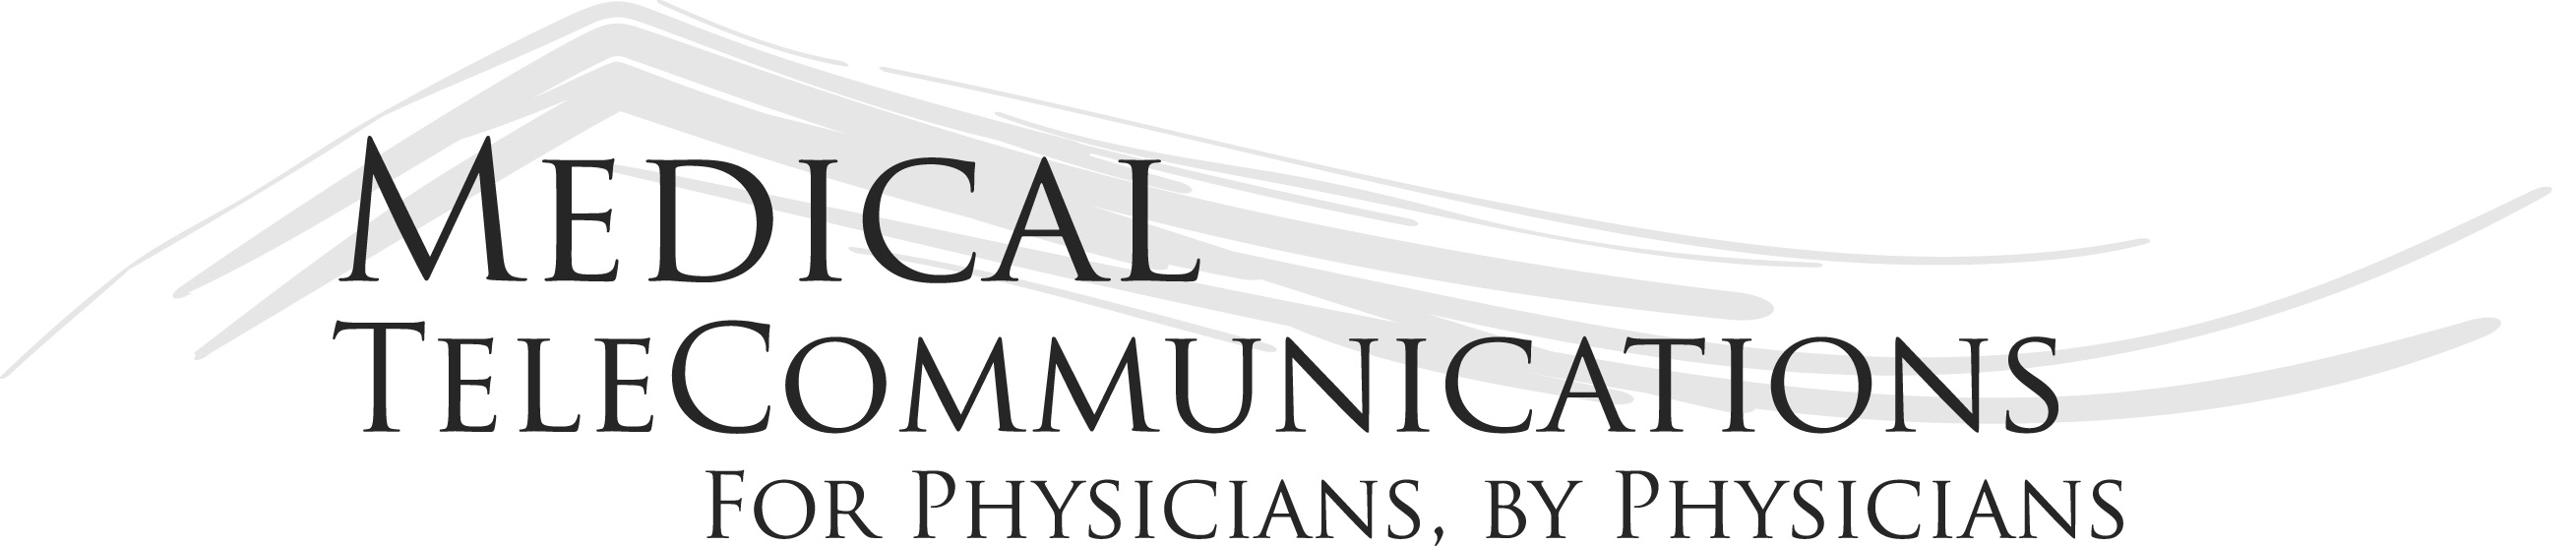 Medical TeleCommunications Becomes Preferred Vendor to WMS Members